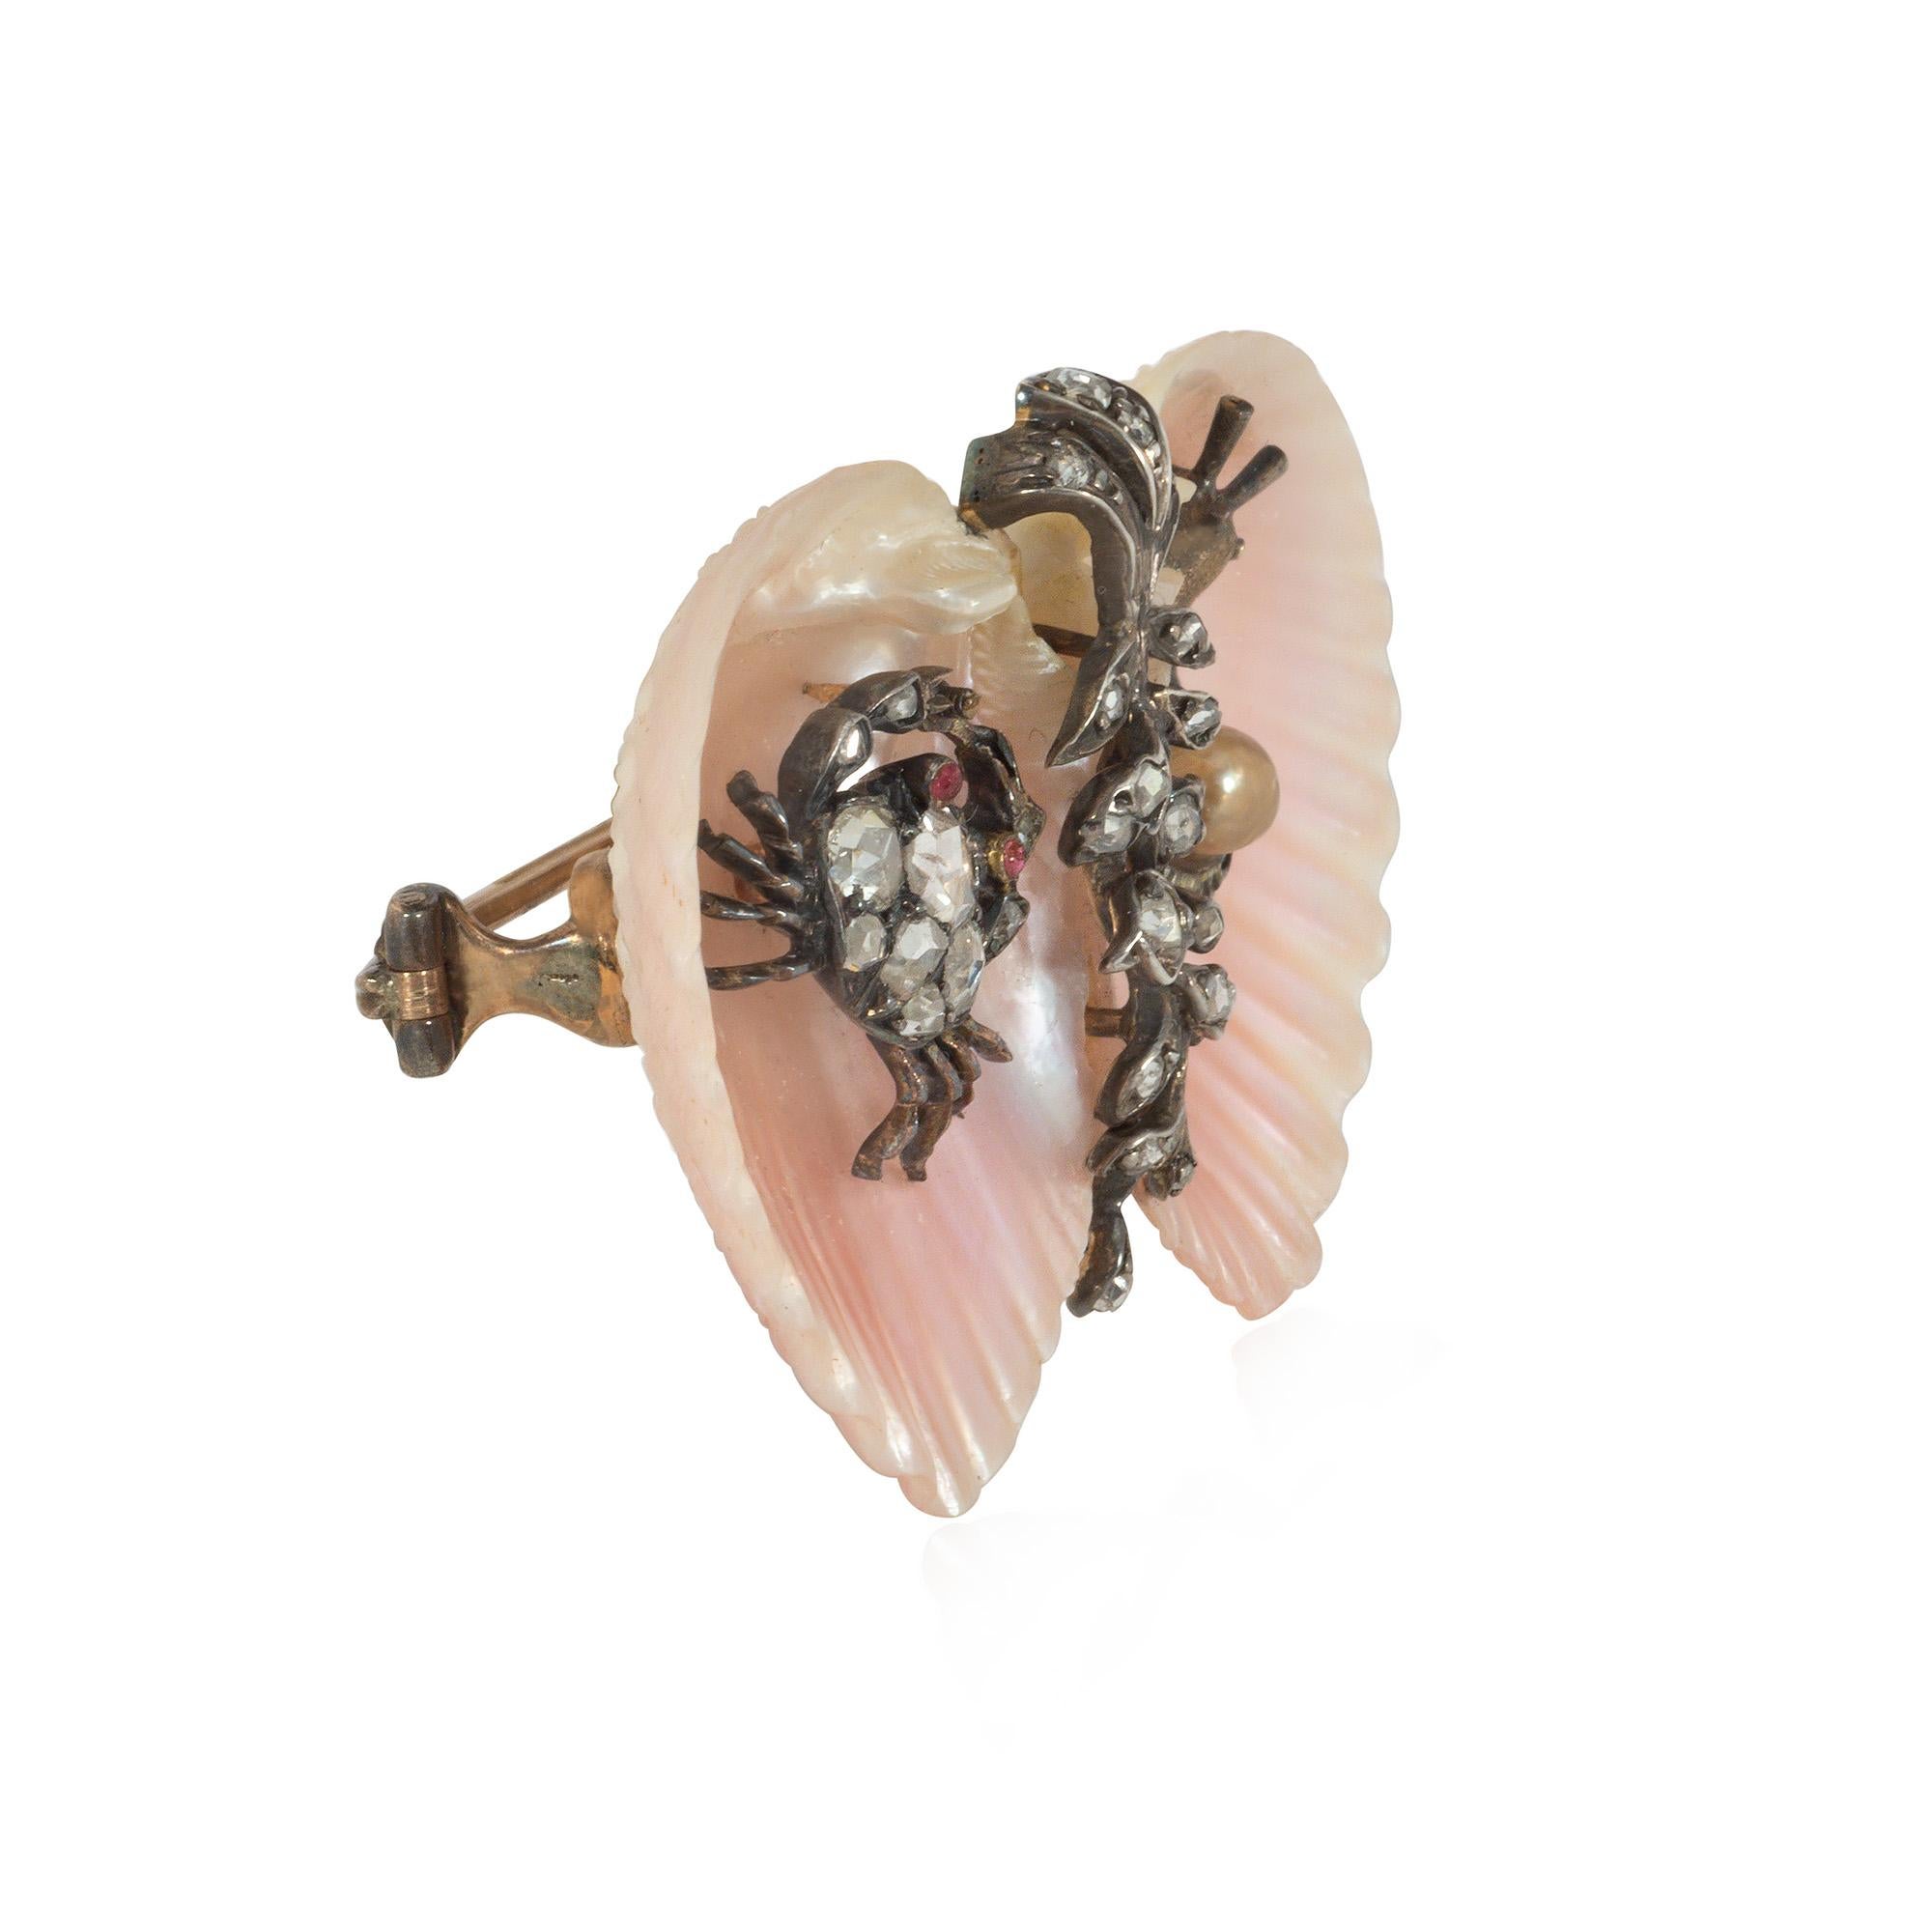 An antique Victorian scallop shell, gem-set, and gold brooch, comprised of two shells adjoined by a diamond-set spray of flowers, and enclosing a diamond-set crab with ruby eyes, and a diamond-set snail centered by a pearl, in 10k.

* Includes